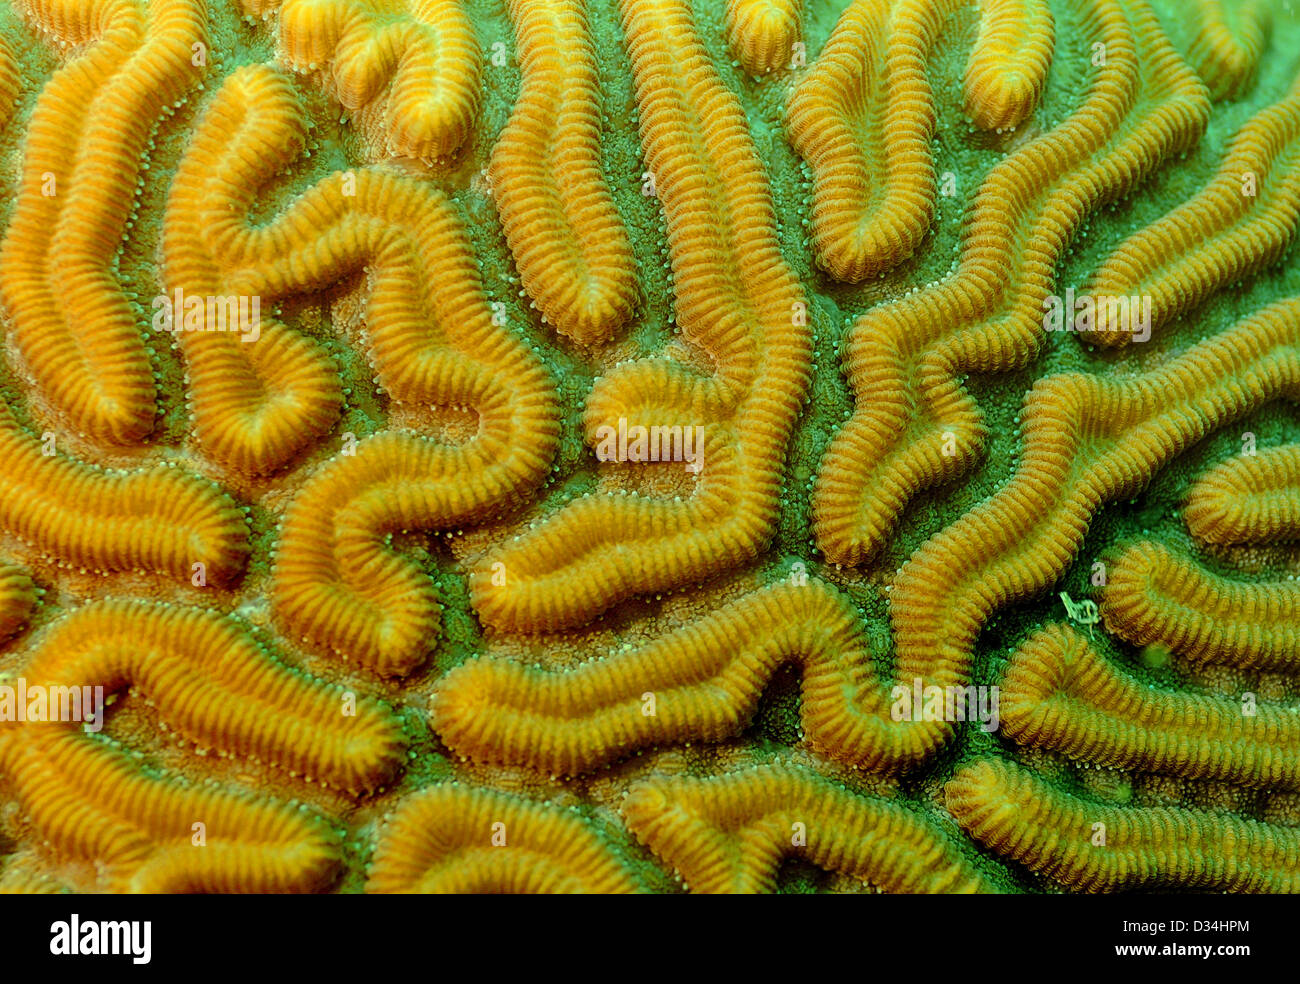 close up image of brain coral underwater Stock Photo